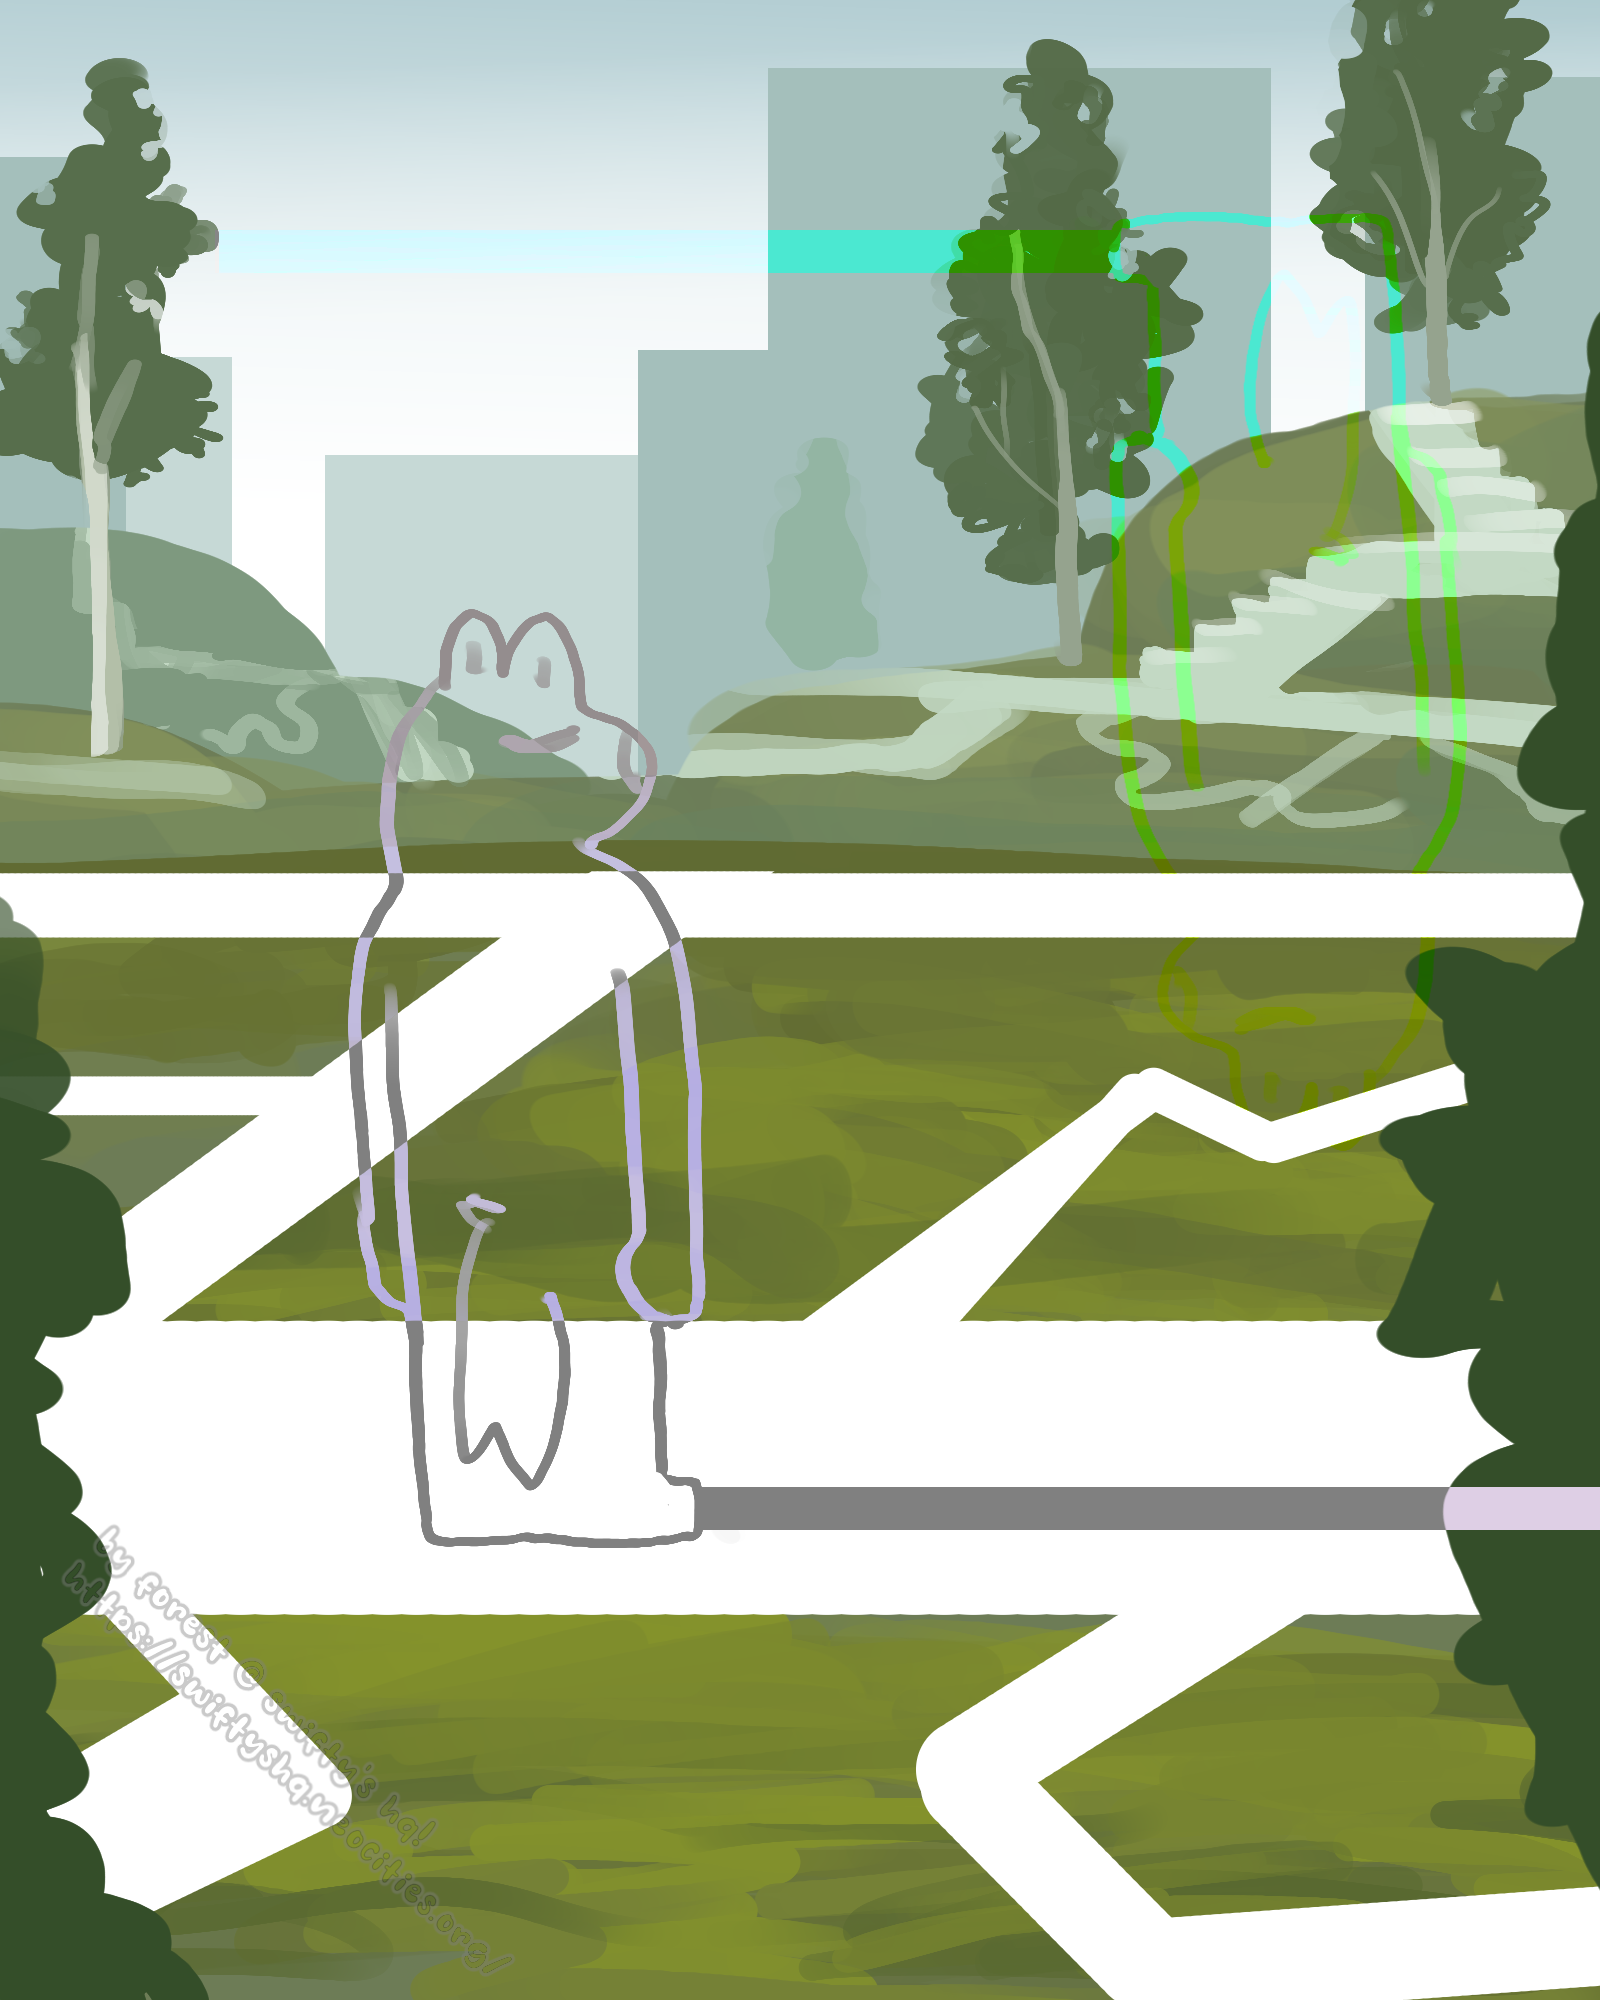 a mazelike pathway over a finely cut lawn. there are many birch trees scattered around, and tall buildings in the background. there is an outline of a furry standing in the middle of the closest pathway, facing to the right. a faint trace of its mirror image is opposite of it, flipped upside down.